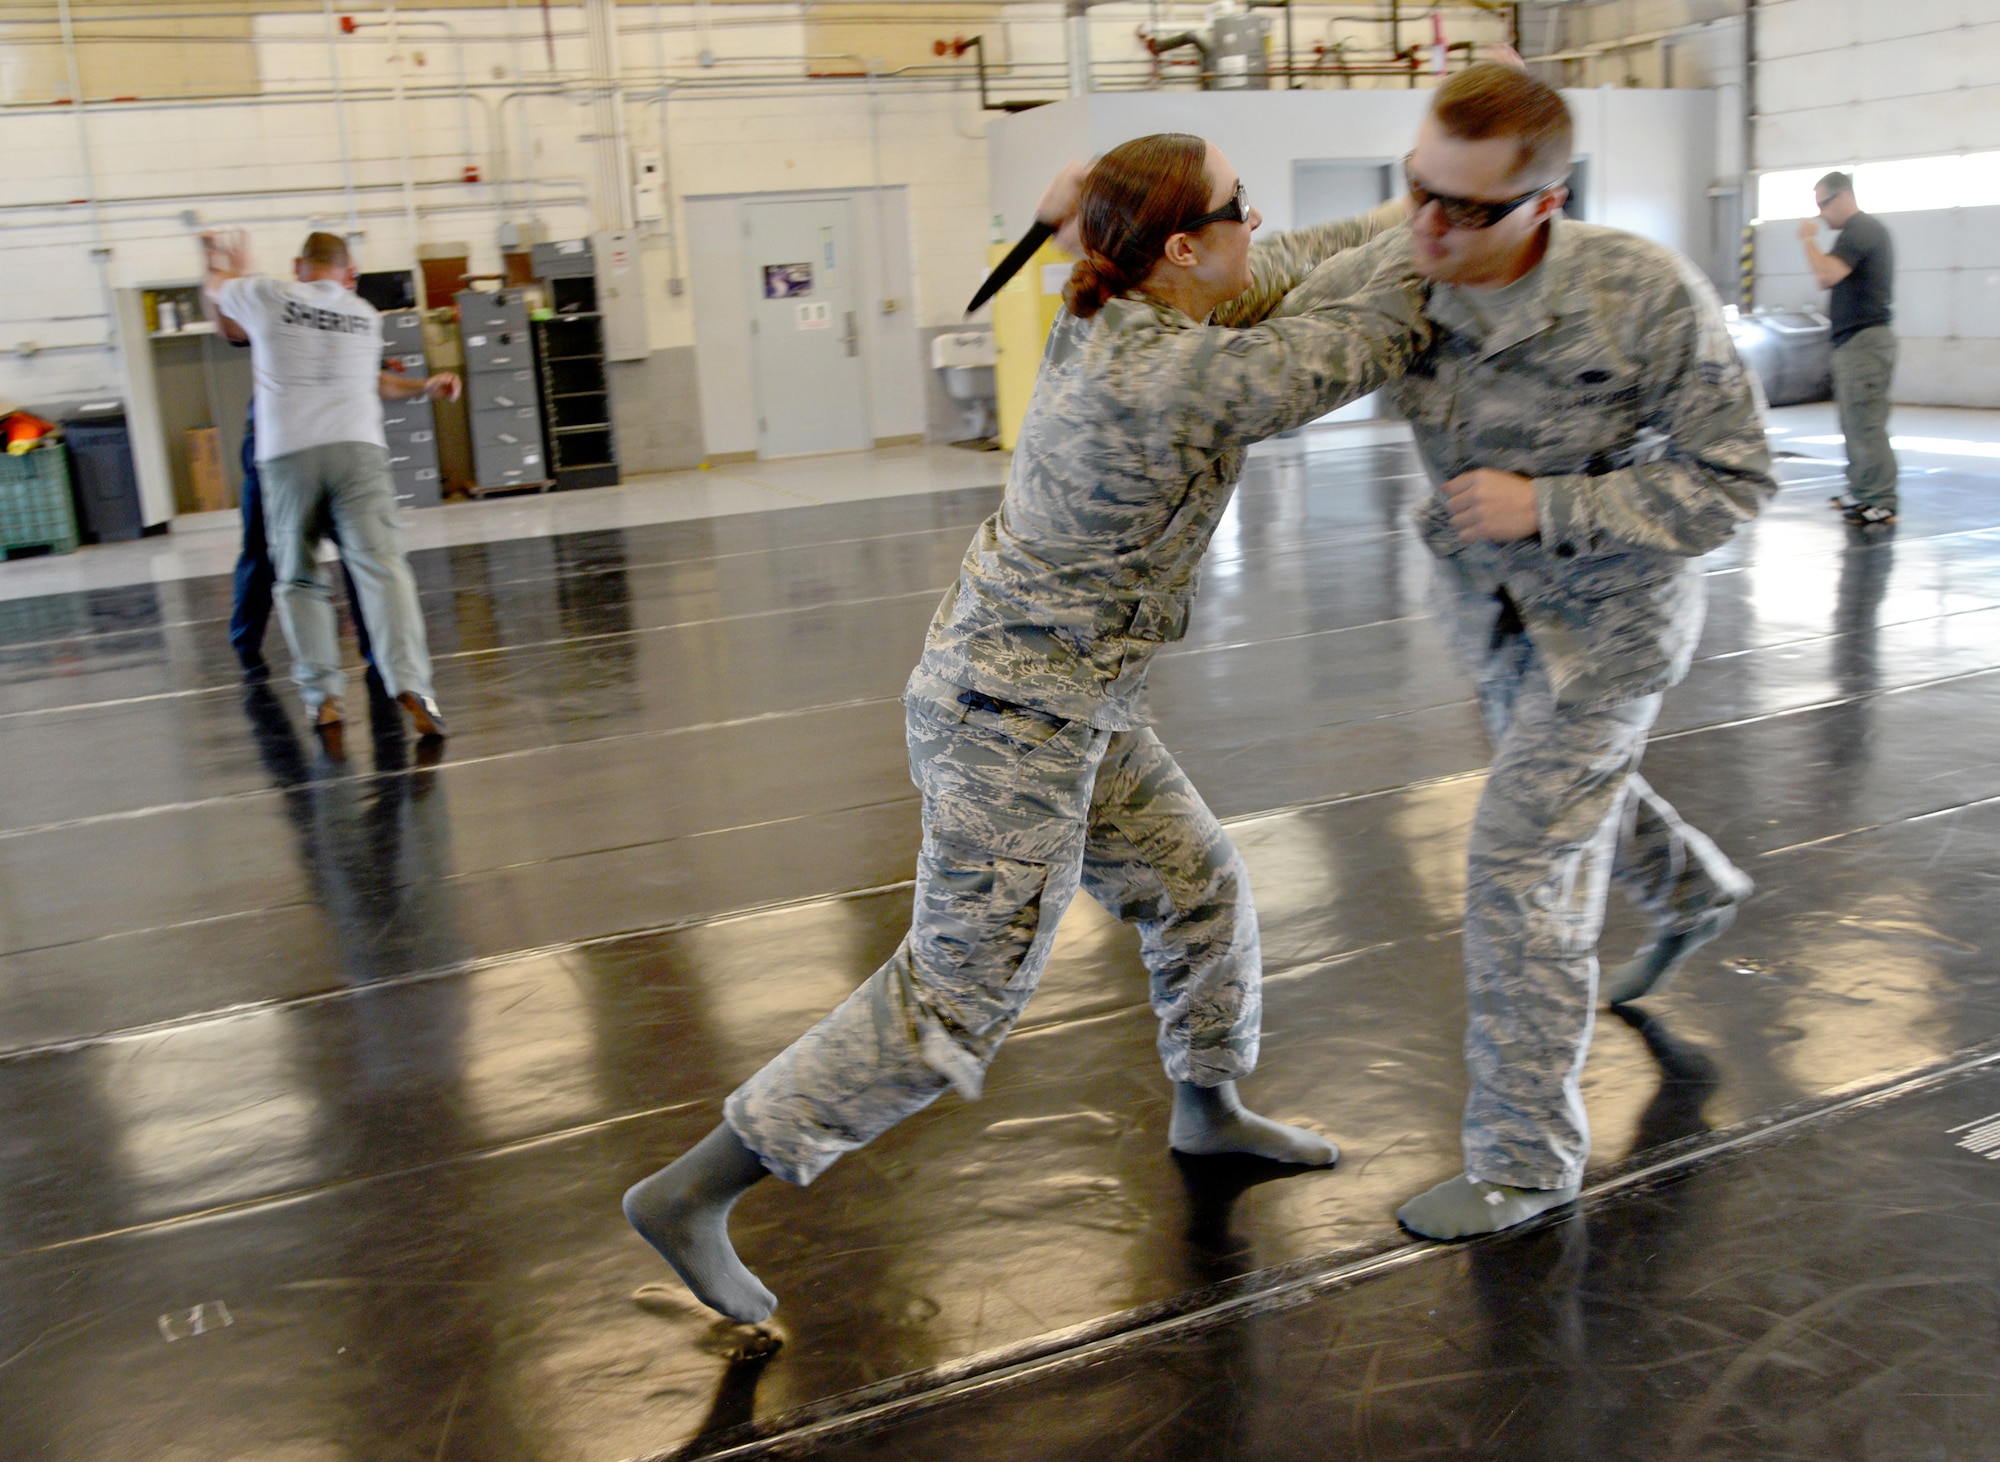 Senior Airmen Cassie Loveland and David Spellman, both with the 72nd Security Forces Squadron, practice offensive and defensive hand-to-hand combat moves during a training course hosted by Blue Shield Tactical Systems. The Airmen trained side-by-side with officers from The Village Police Department and Muskogee Campus Police Department during the two day course April 10-11. (Air Force photo by Kelly White)